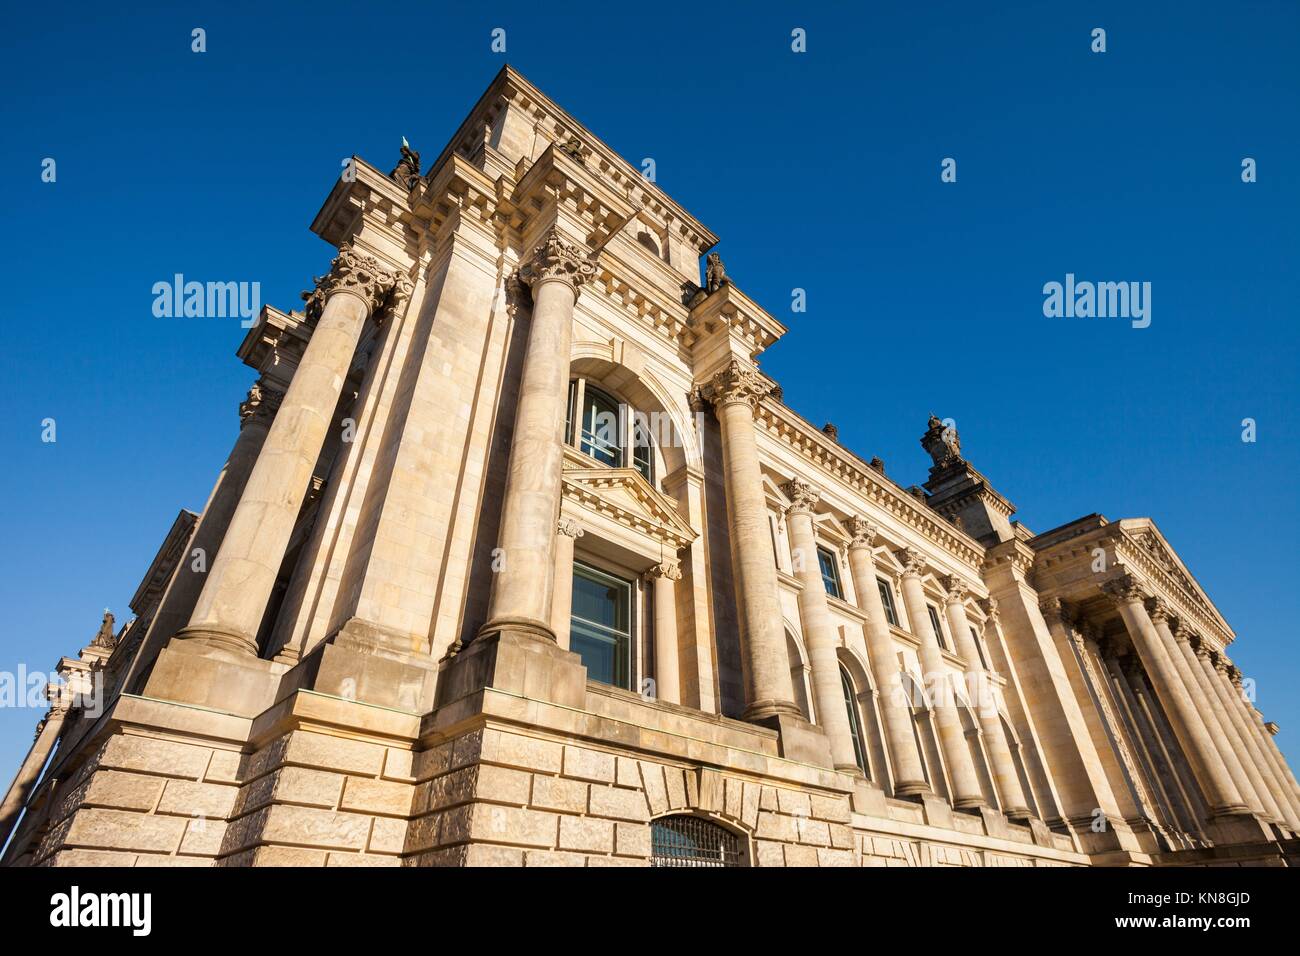 The German Federal Parliament (Reichstag) building in Berlin. Stock Photo